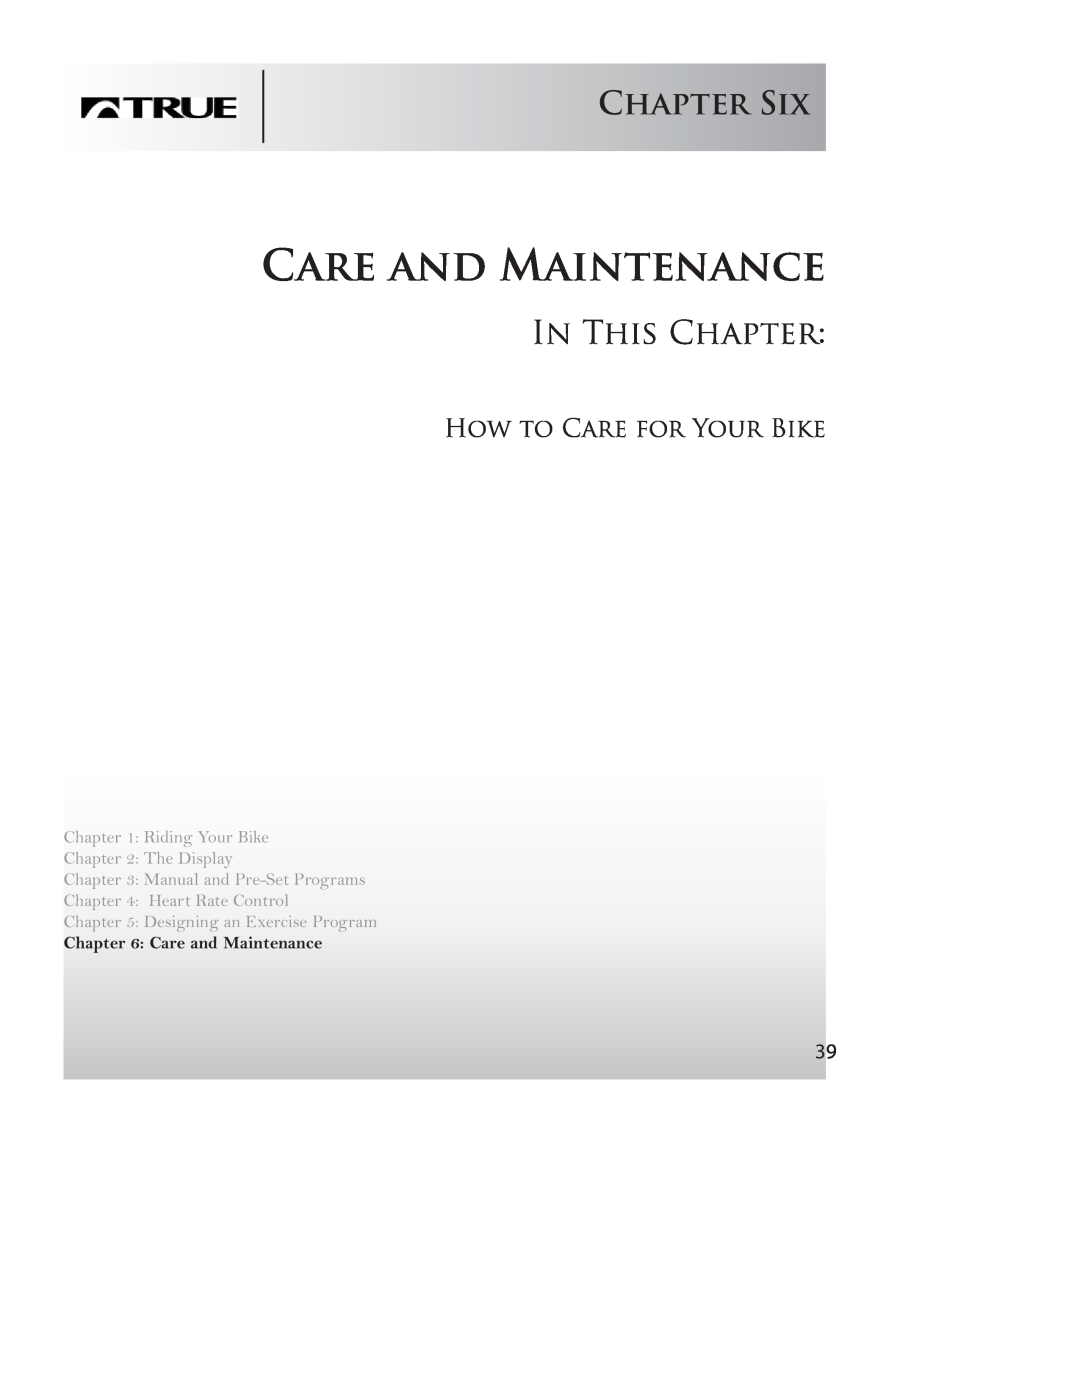 True Fitness PS50, P100 manual Care and Maintenance, Chapter Six, How to Care for Your Bike, In This Chapter 